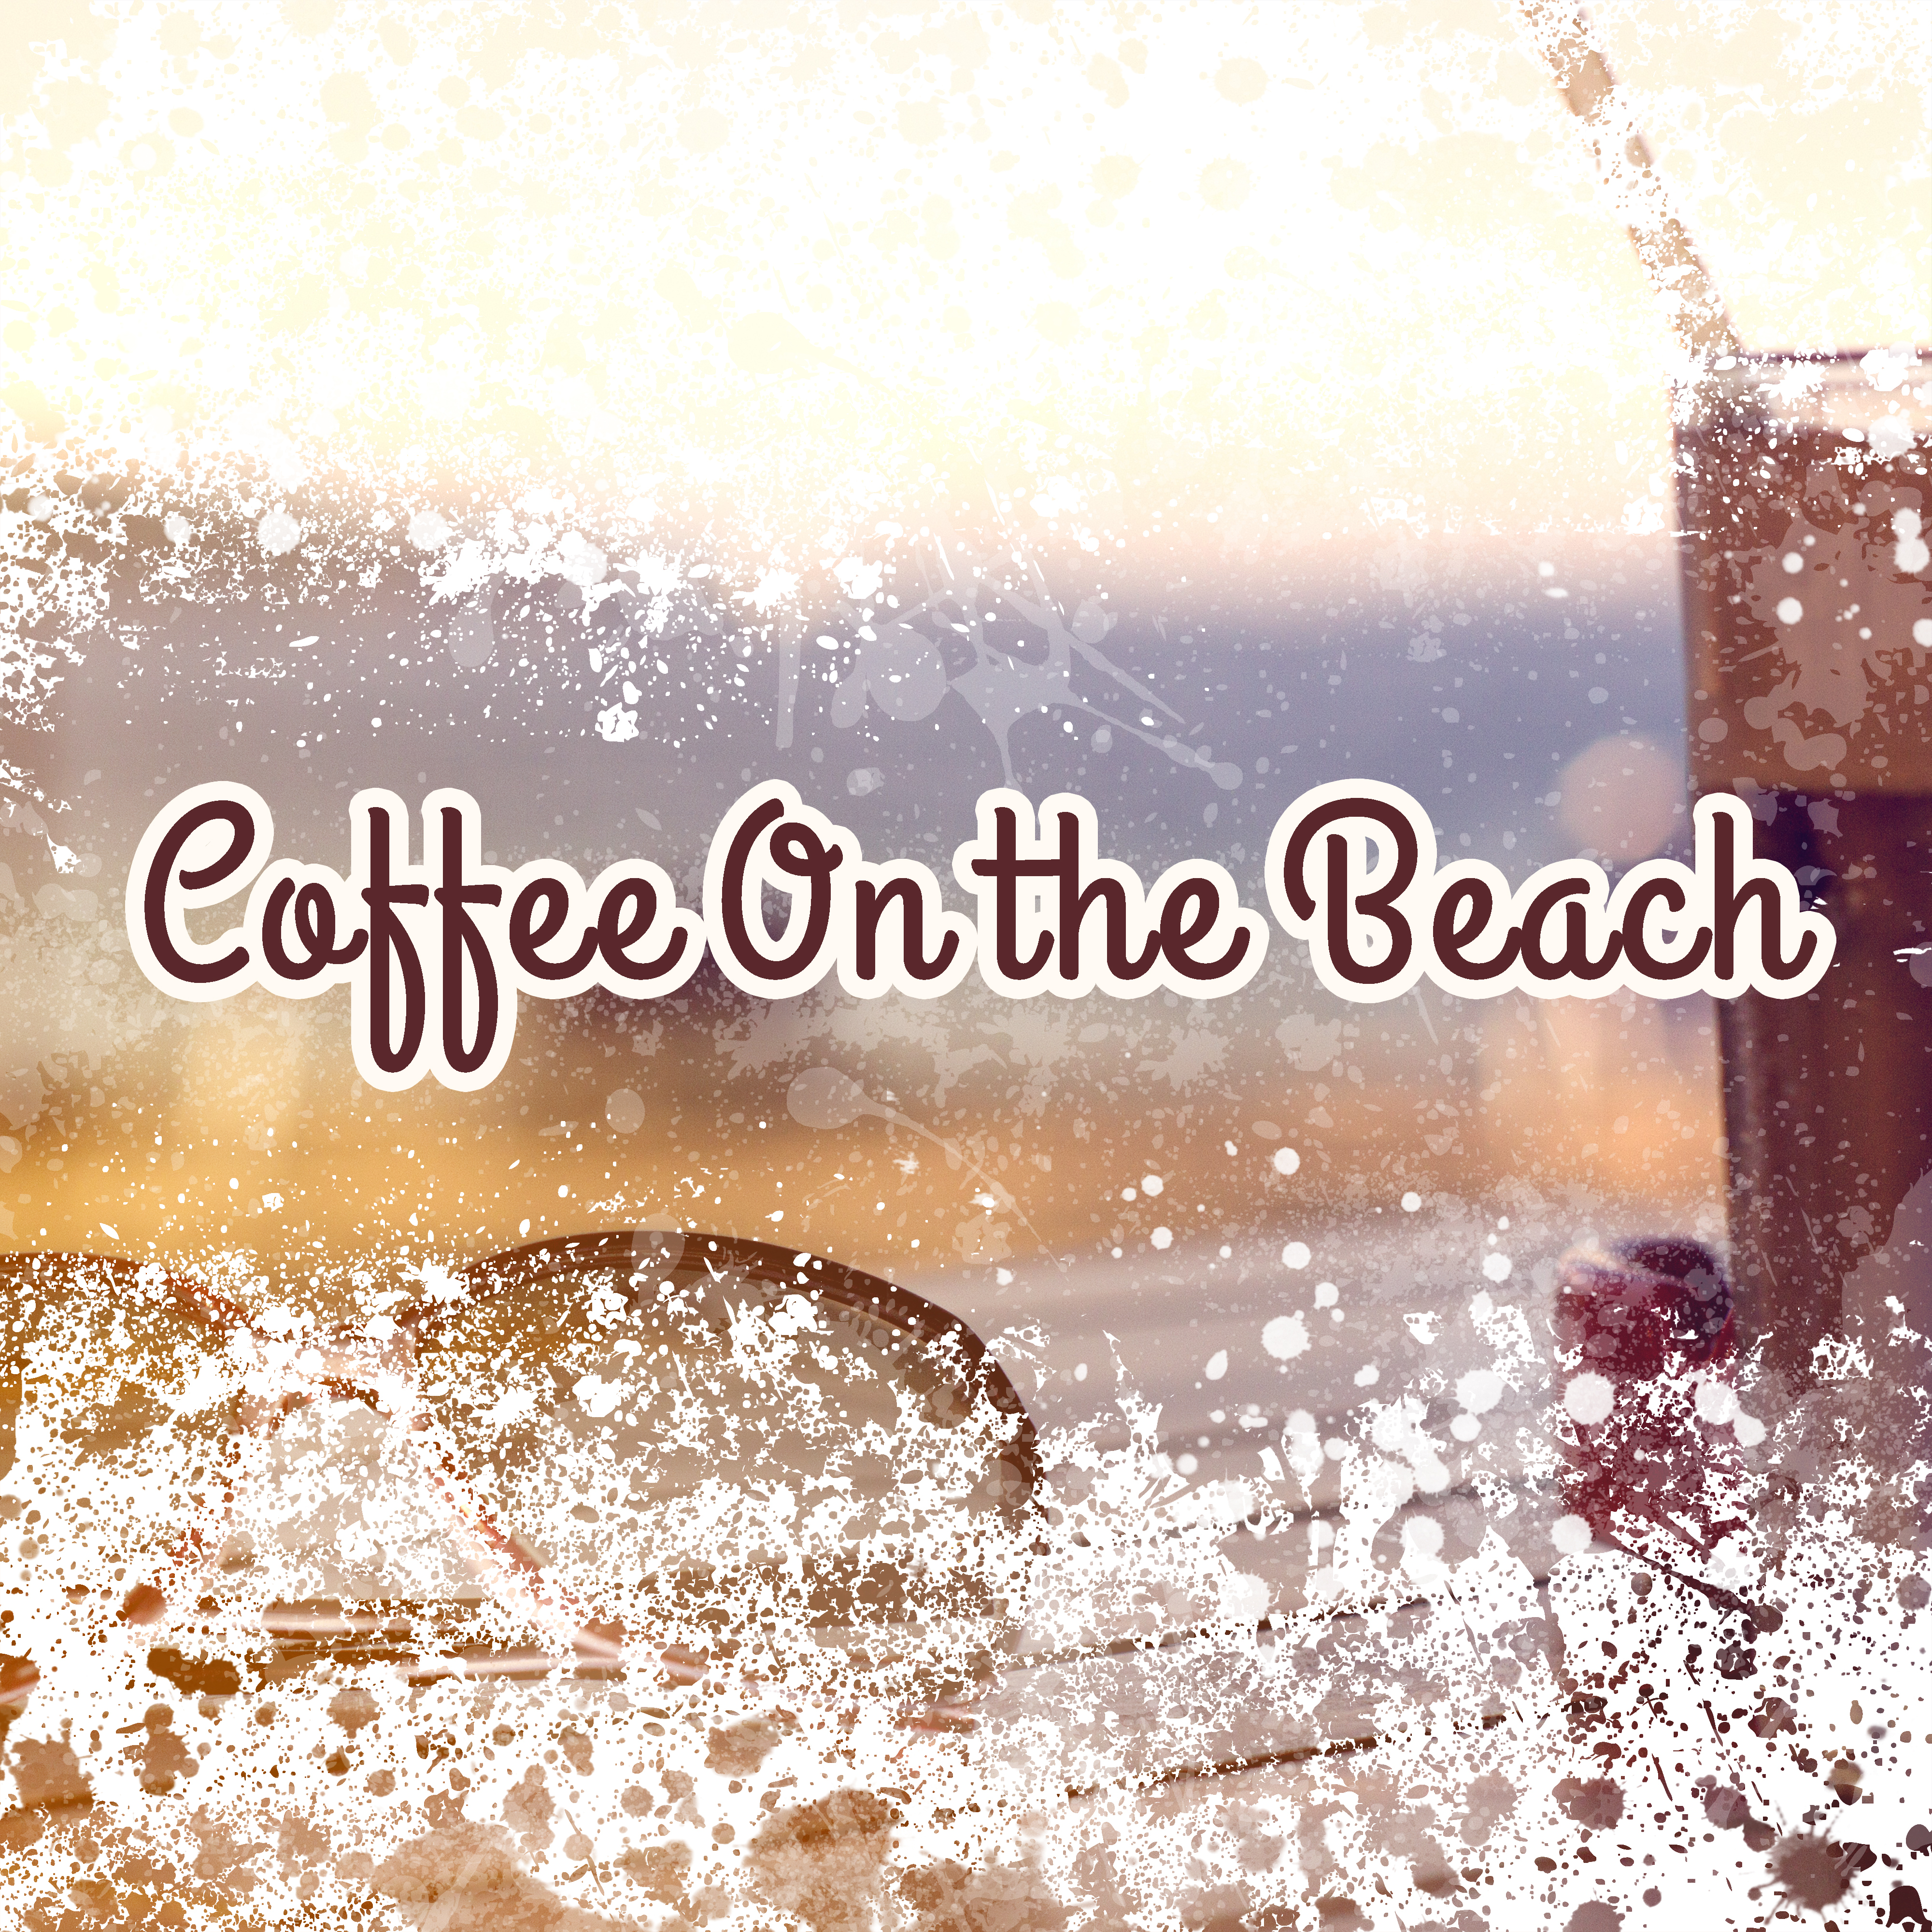 Coffee On the Beach – Chill Out Beats, Cafe Break, Soft Music 2017, Beach Relaxation, Chill Lounge